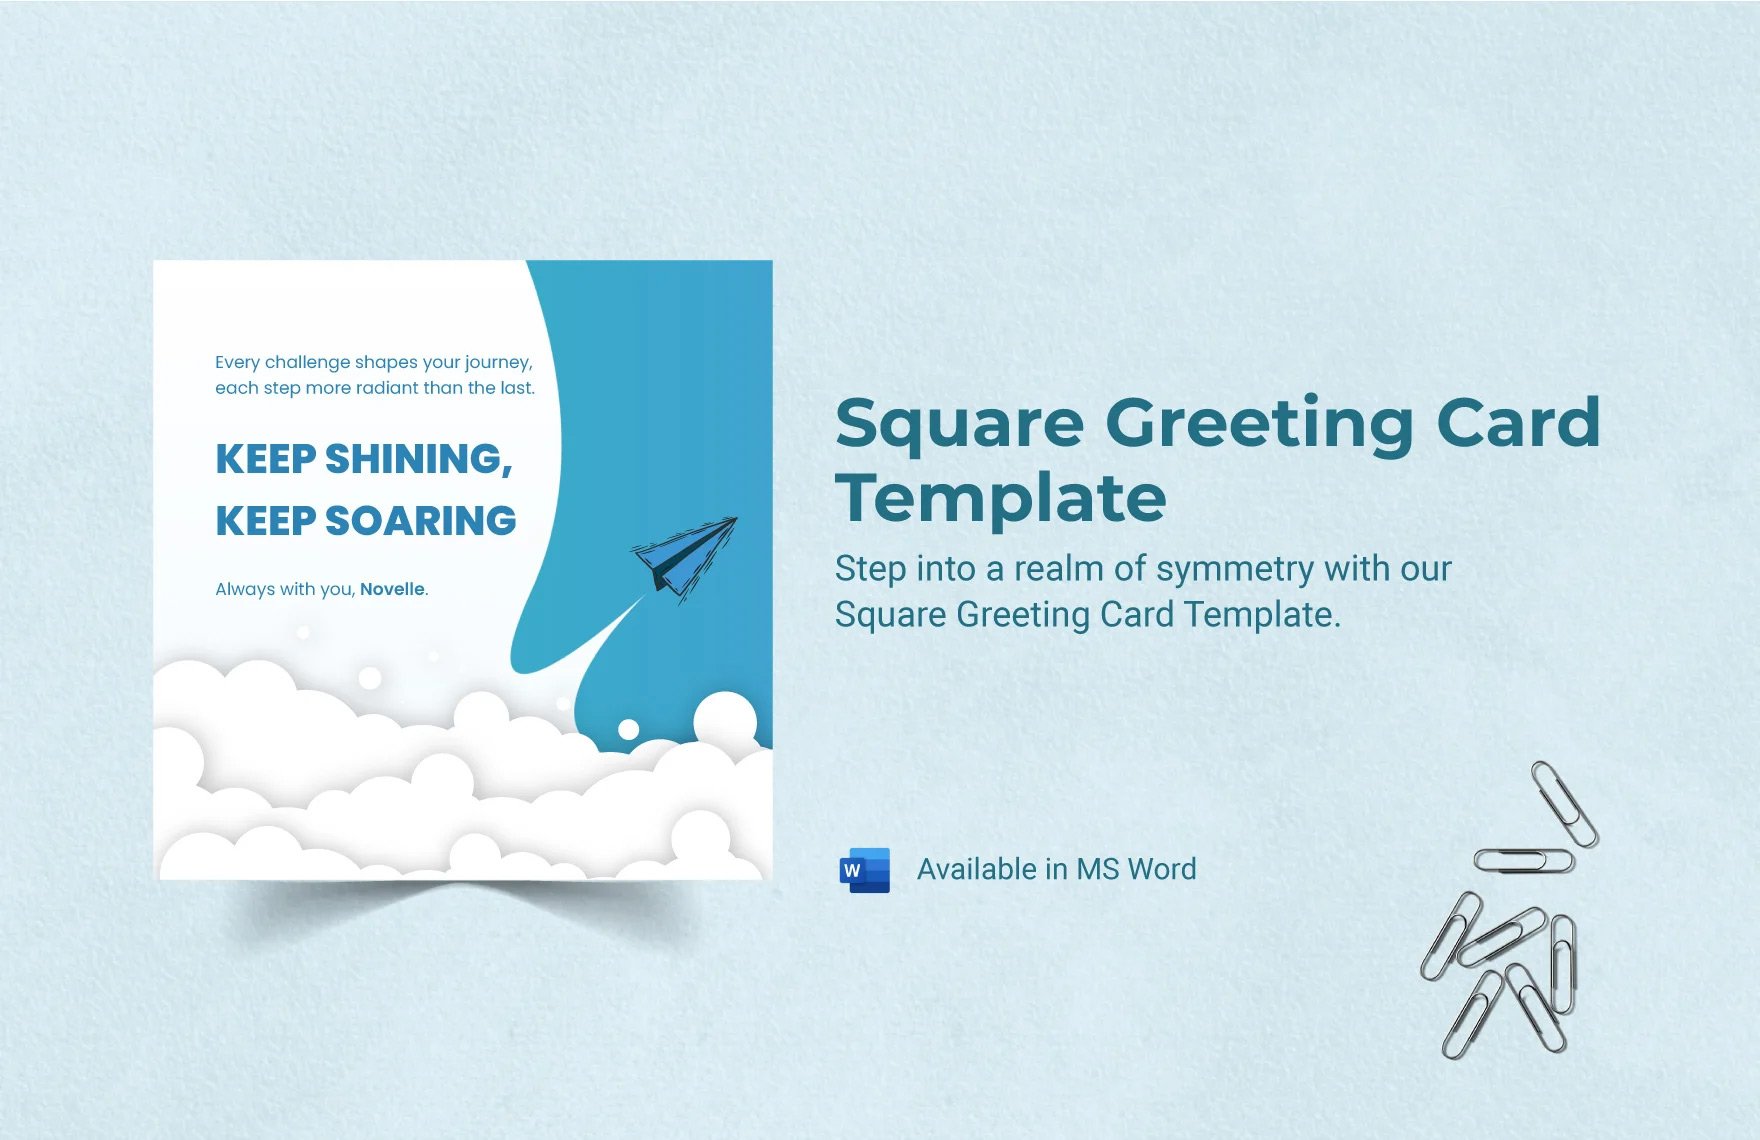 Square Greeting Card Template